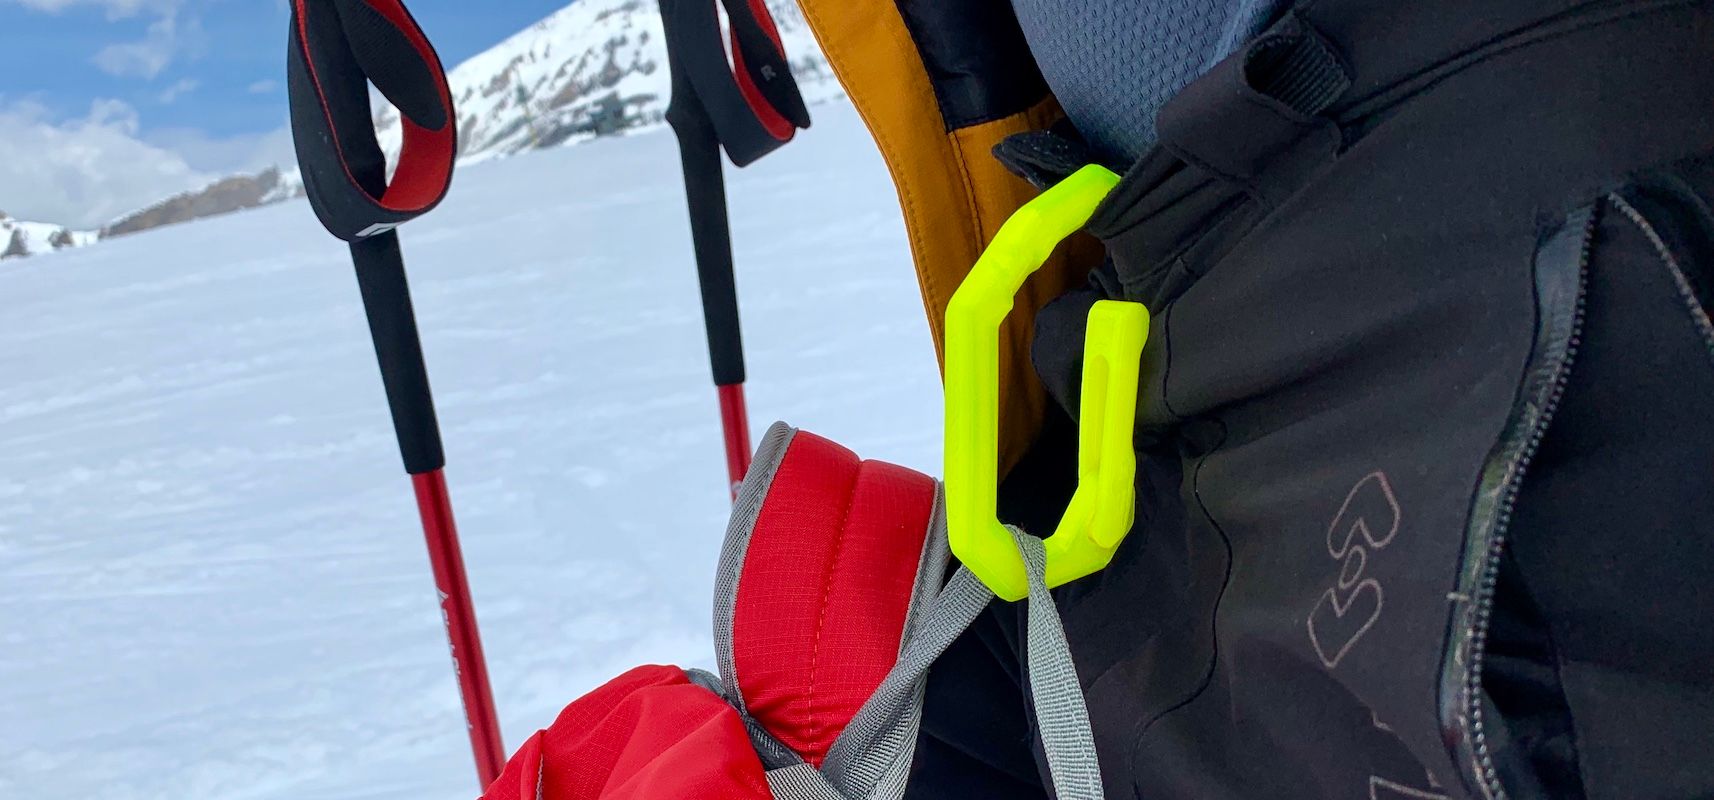 A Carabiner on a Pist